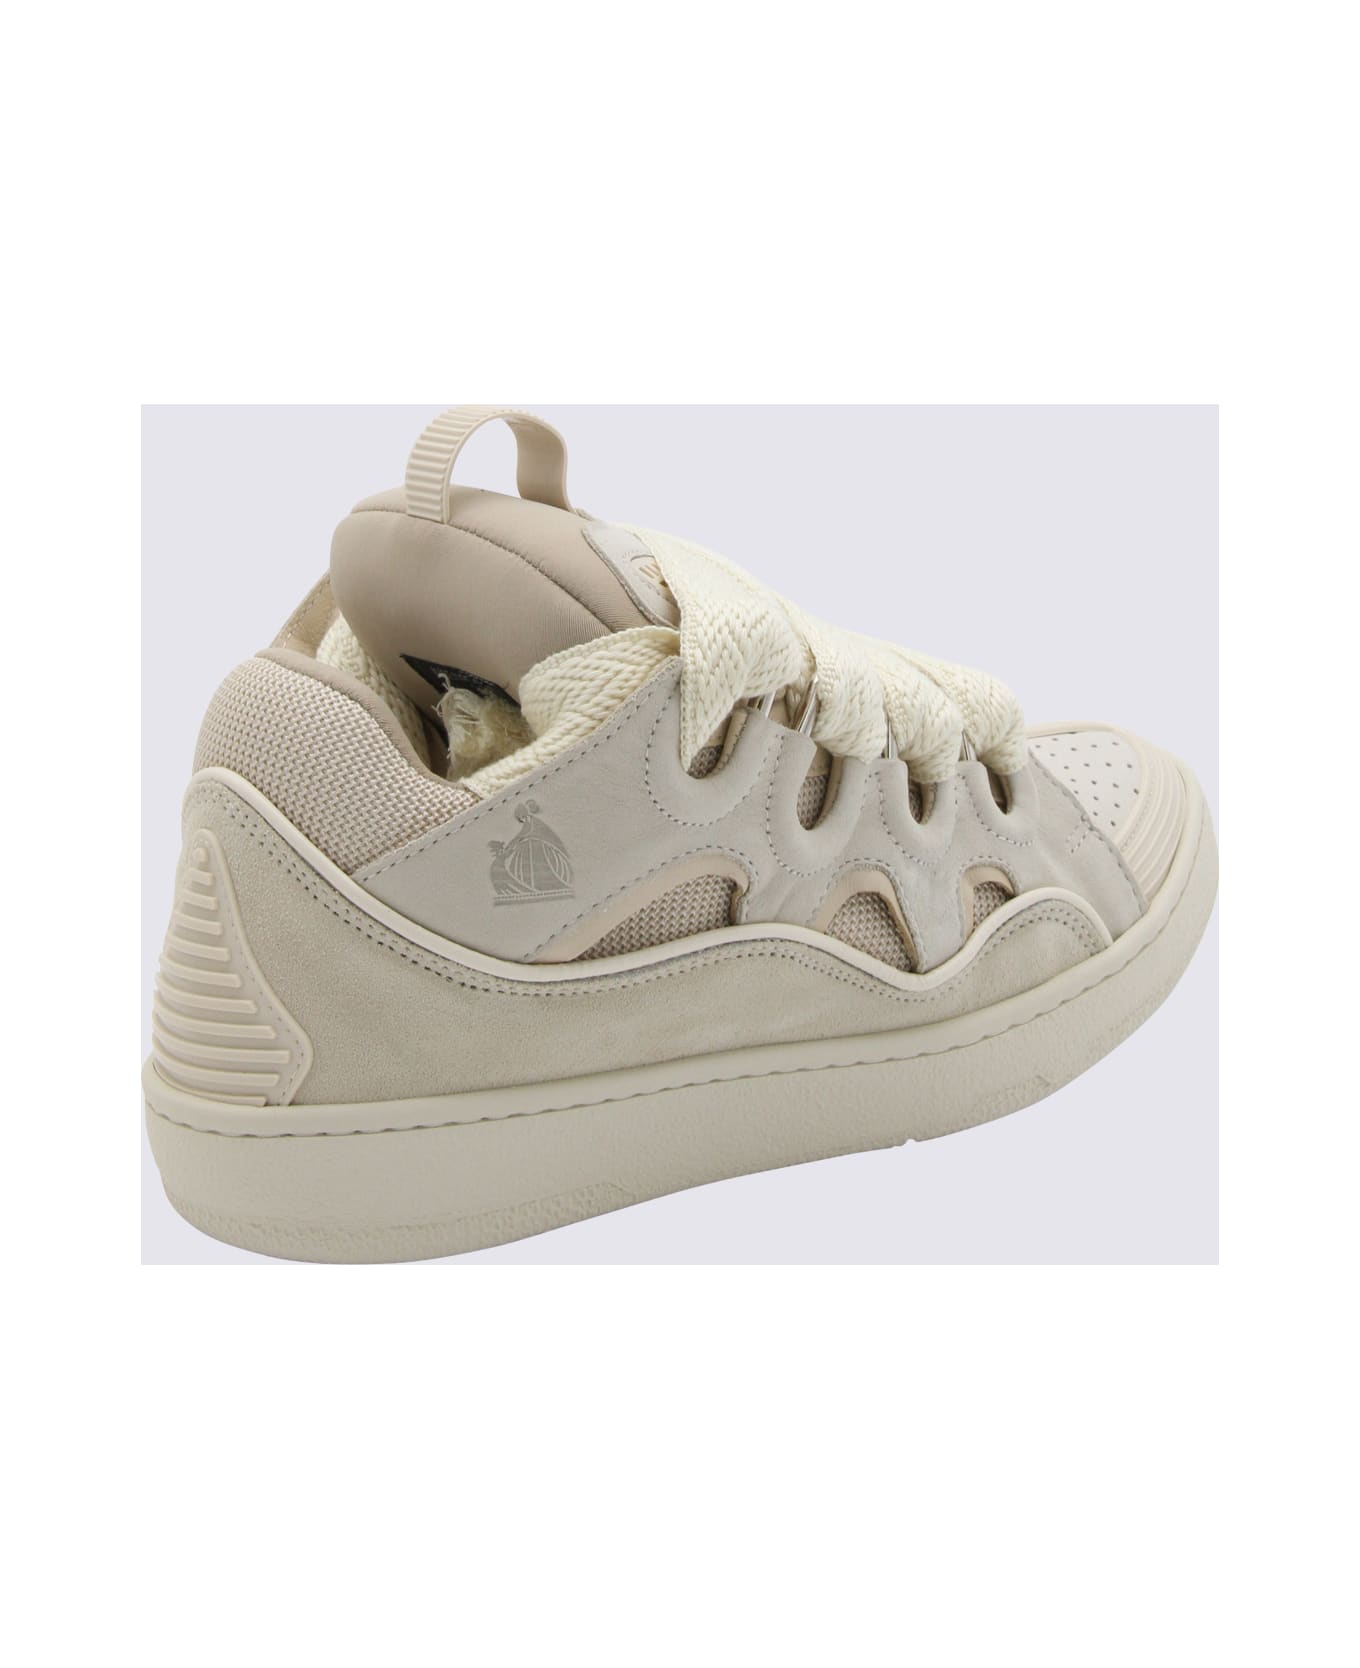 Lanvin White Leather Curb Sneakers - Beige